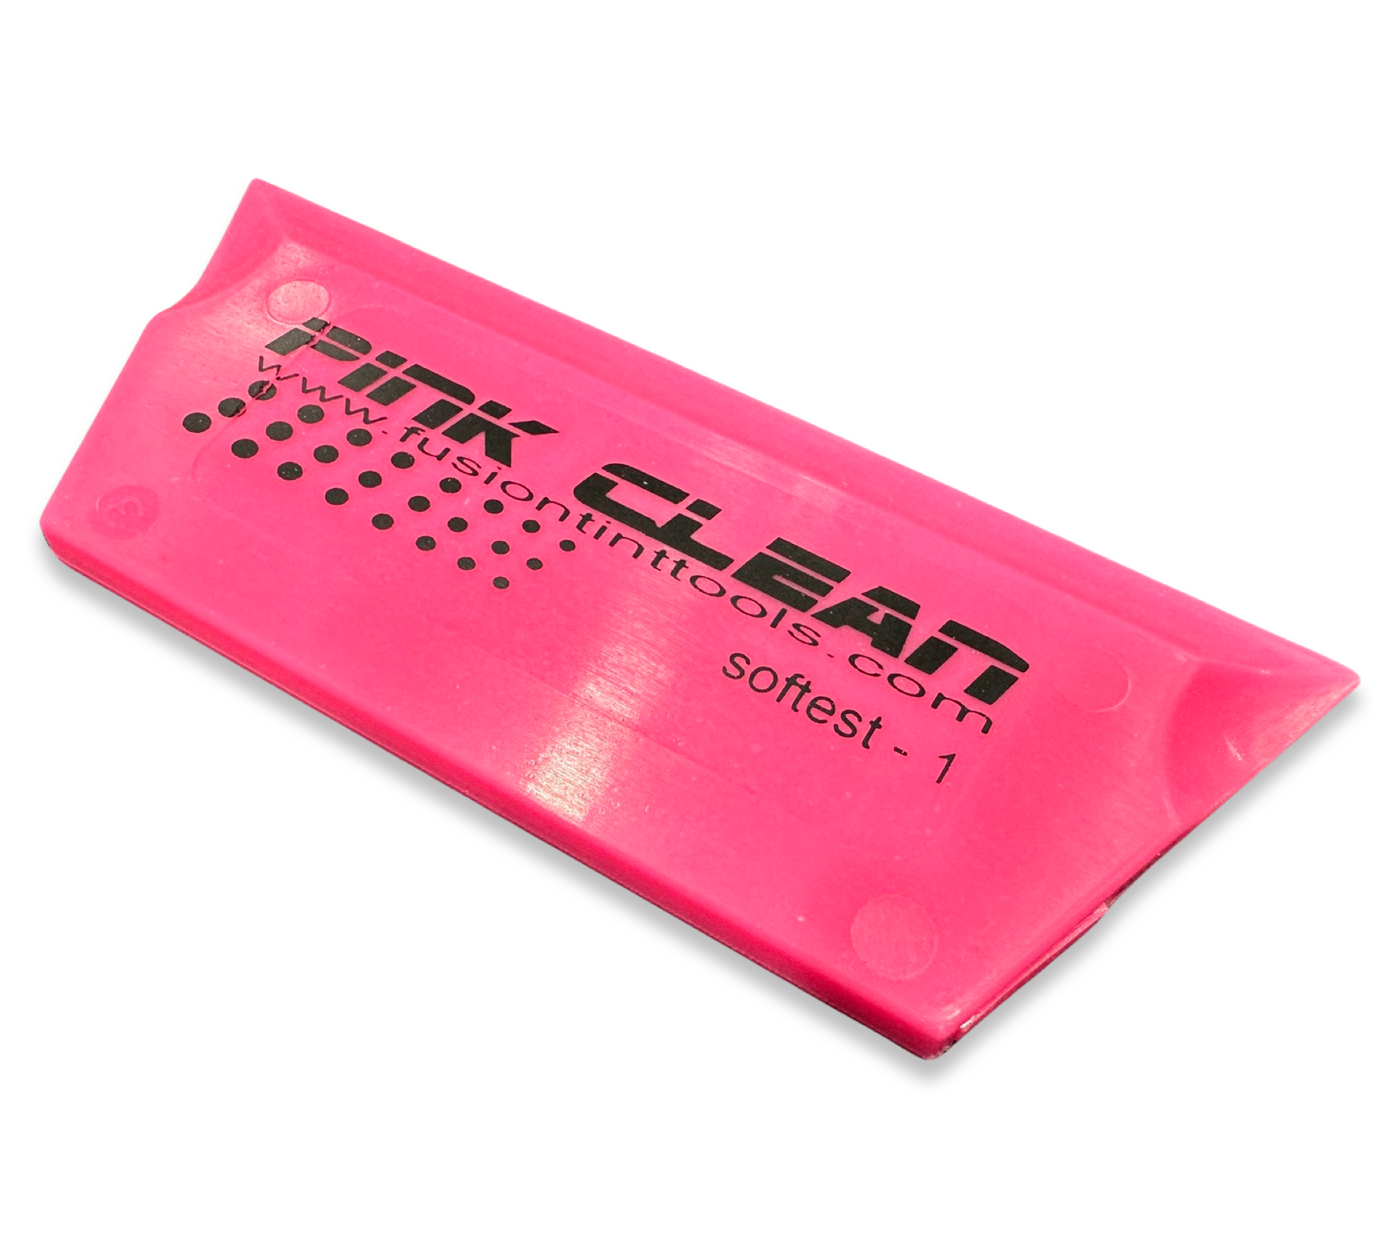 5” Pink Clean Squeegee Blade by Fusion Tools